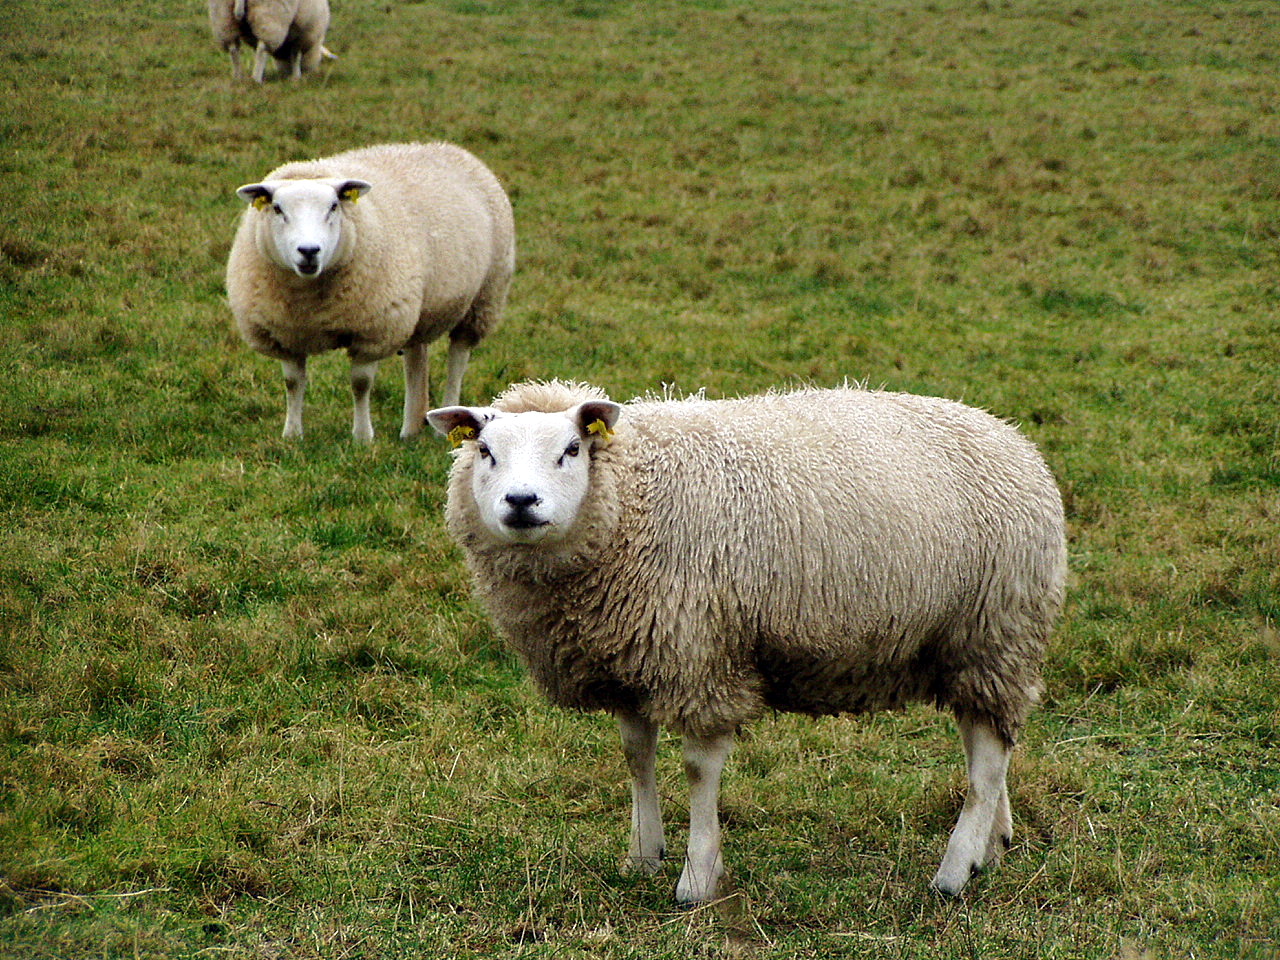 three sheep are standing on a grassy hill